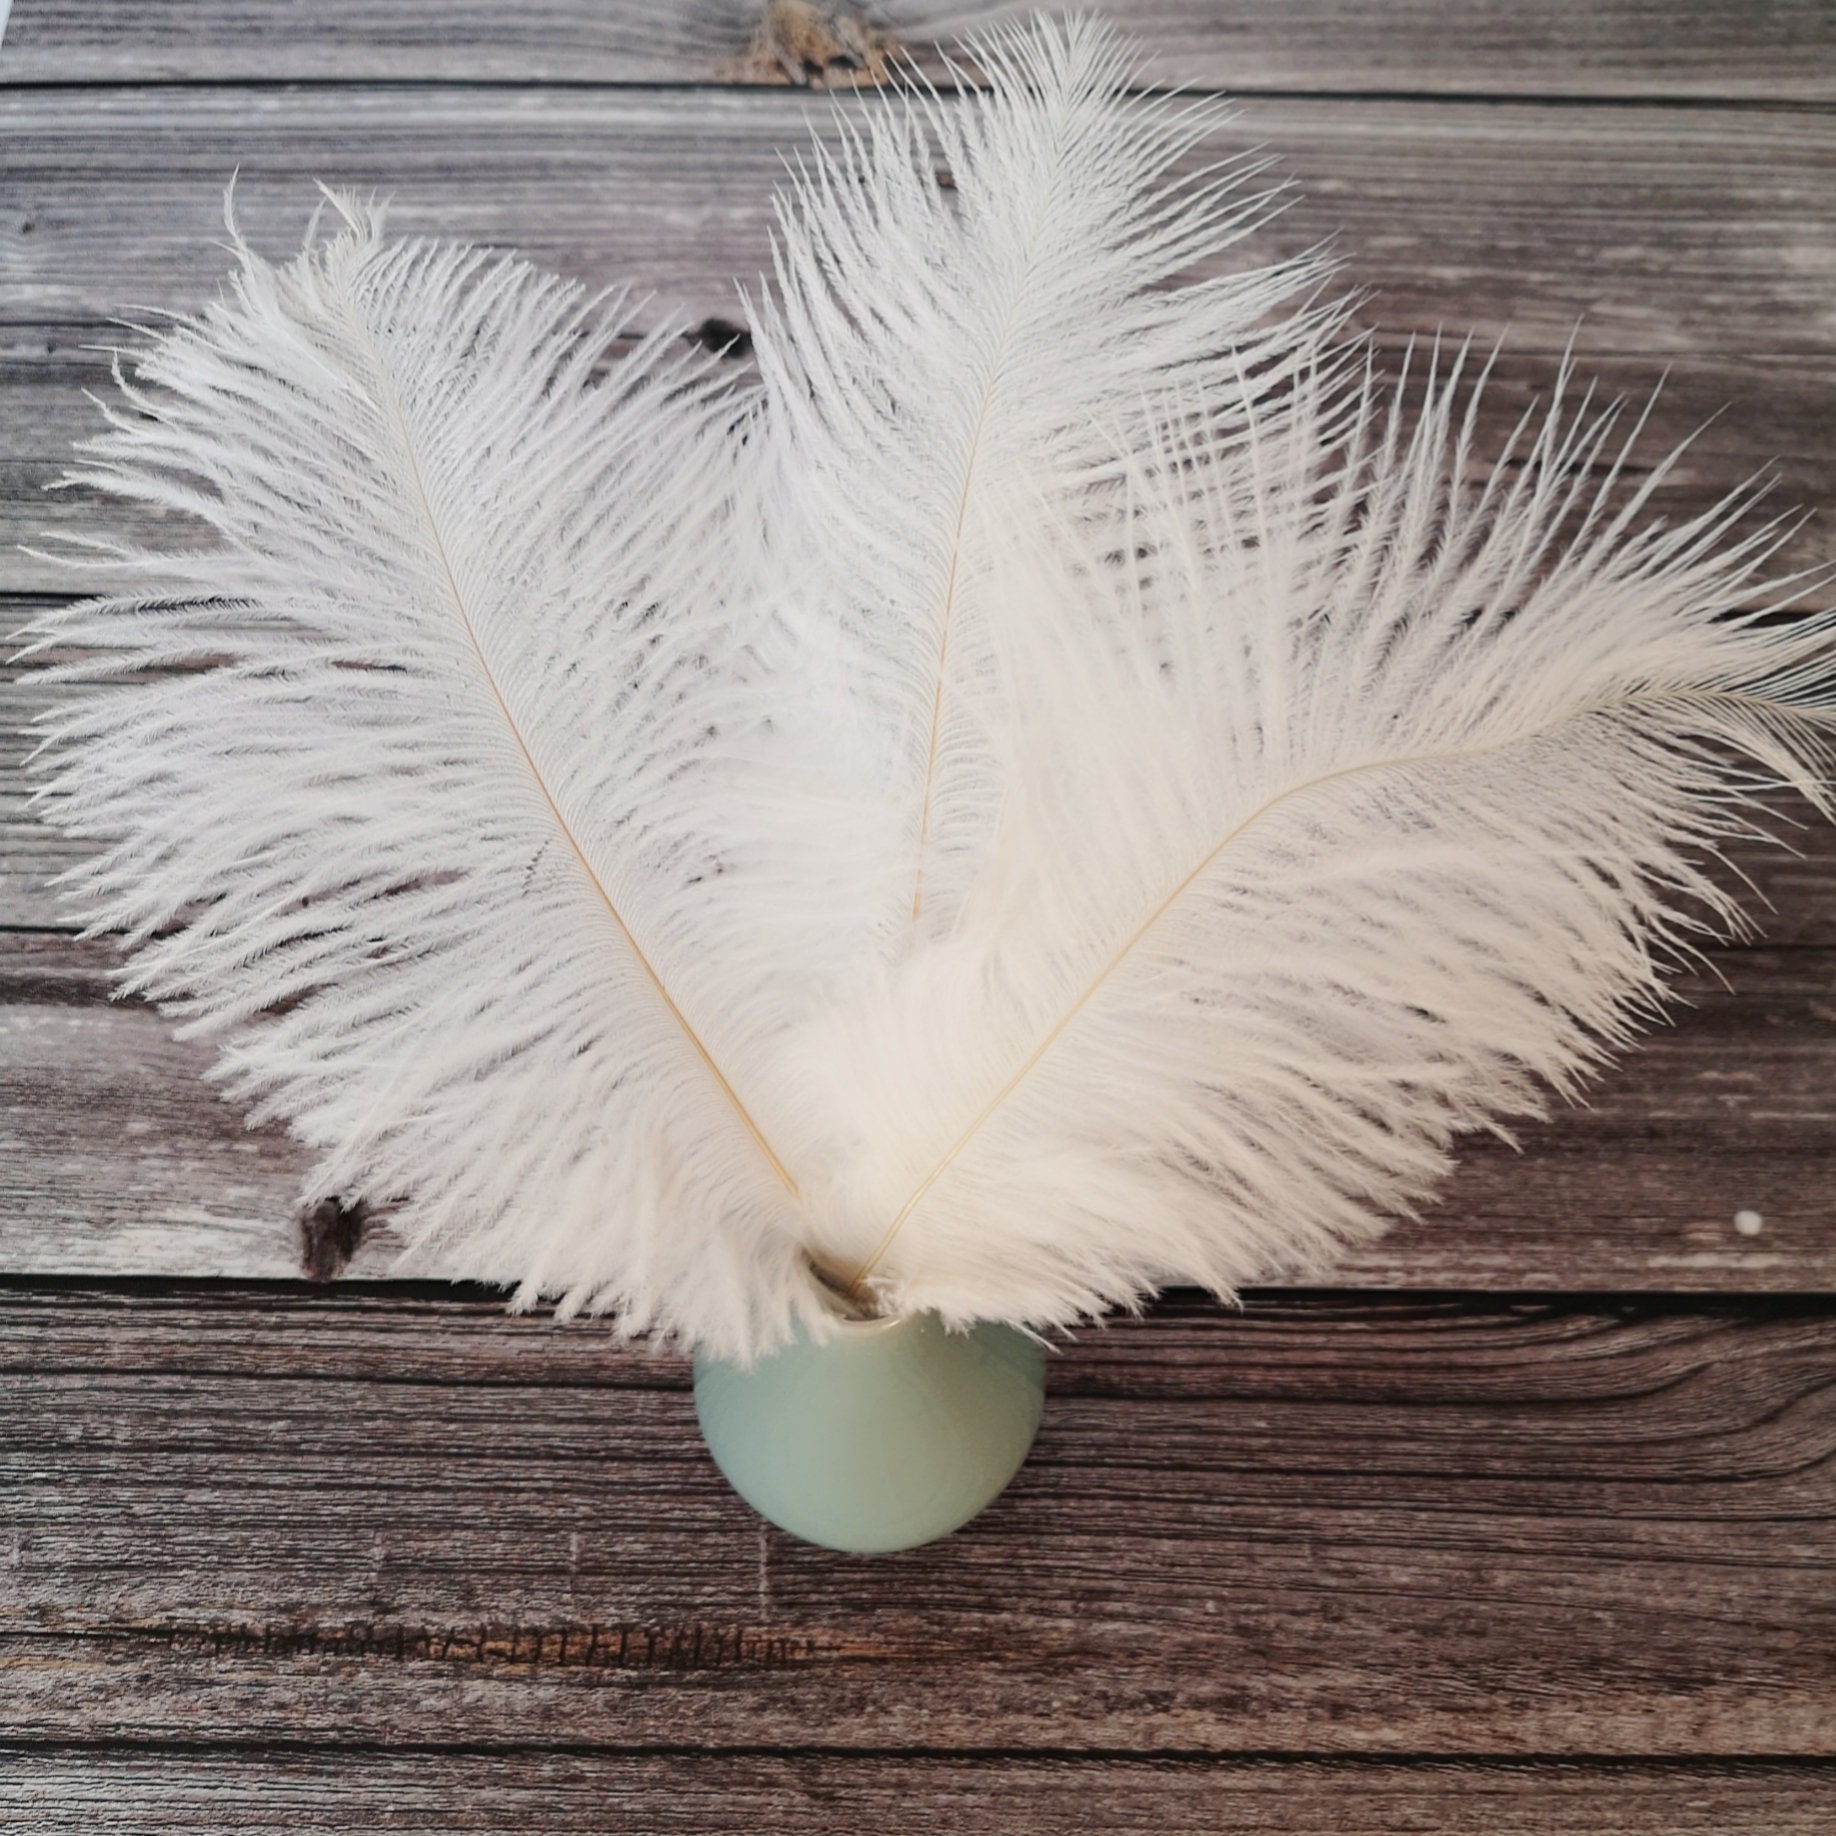 15-80cm White Ostrich Feather Hair for Dresses & Decor - OneYard